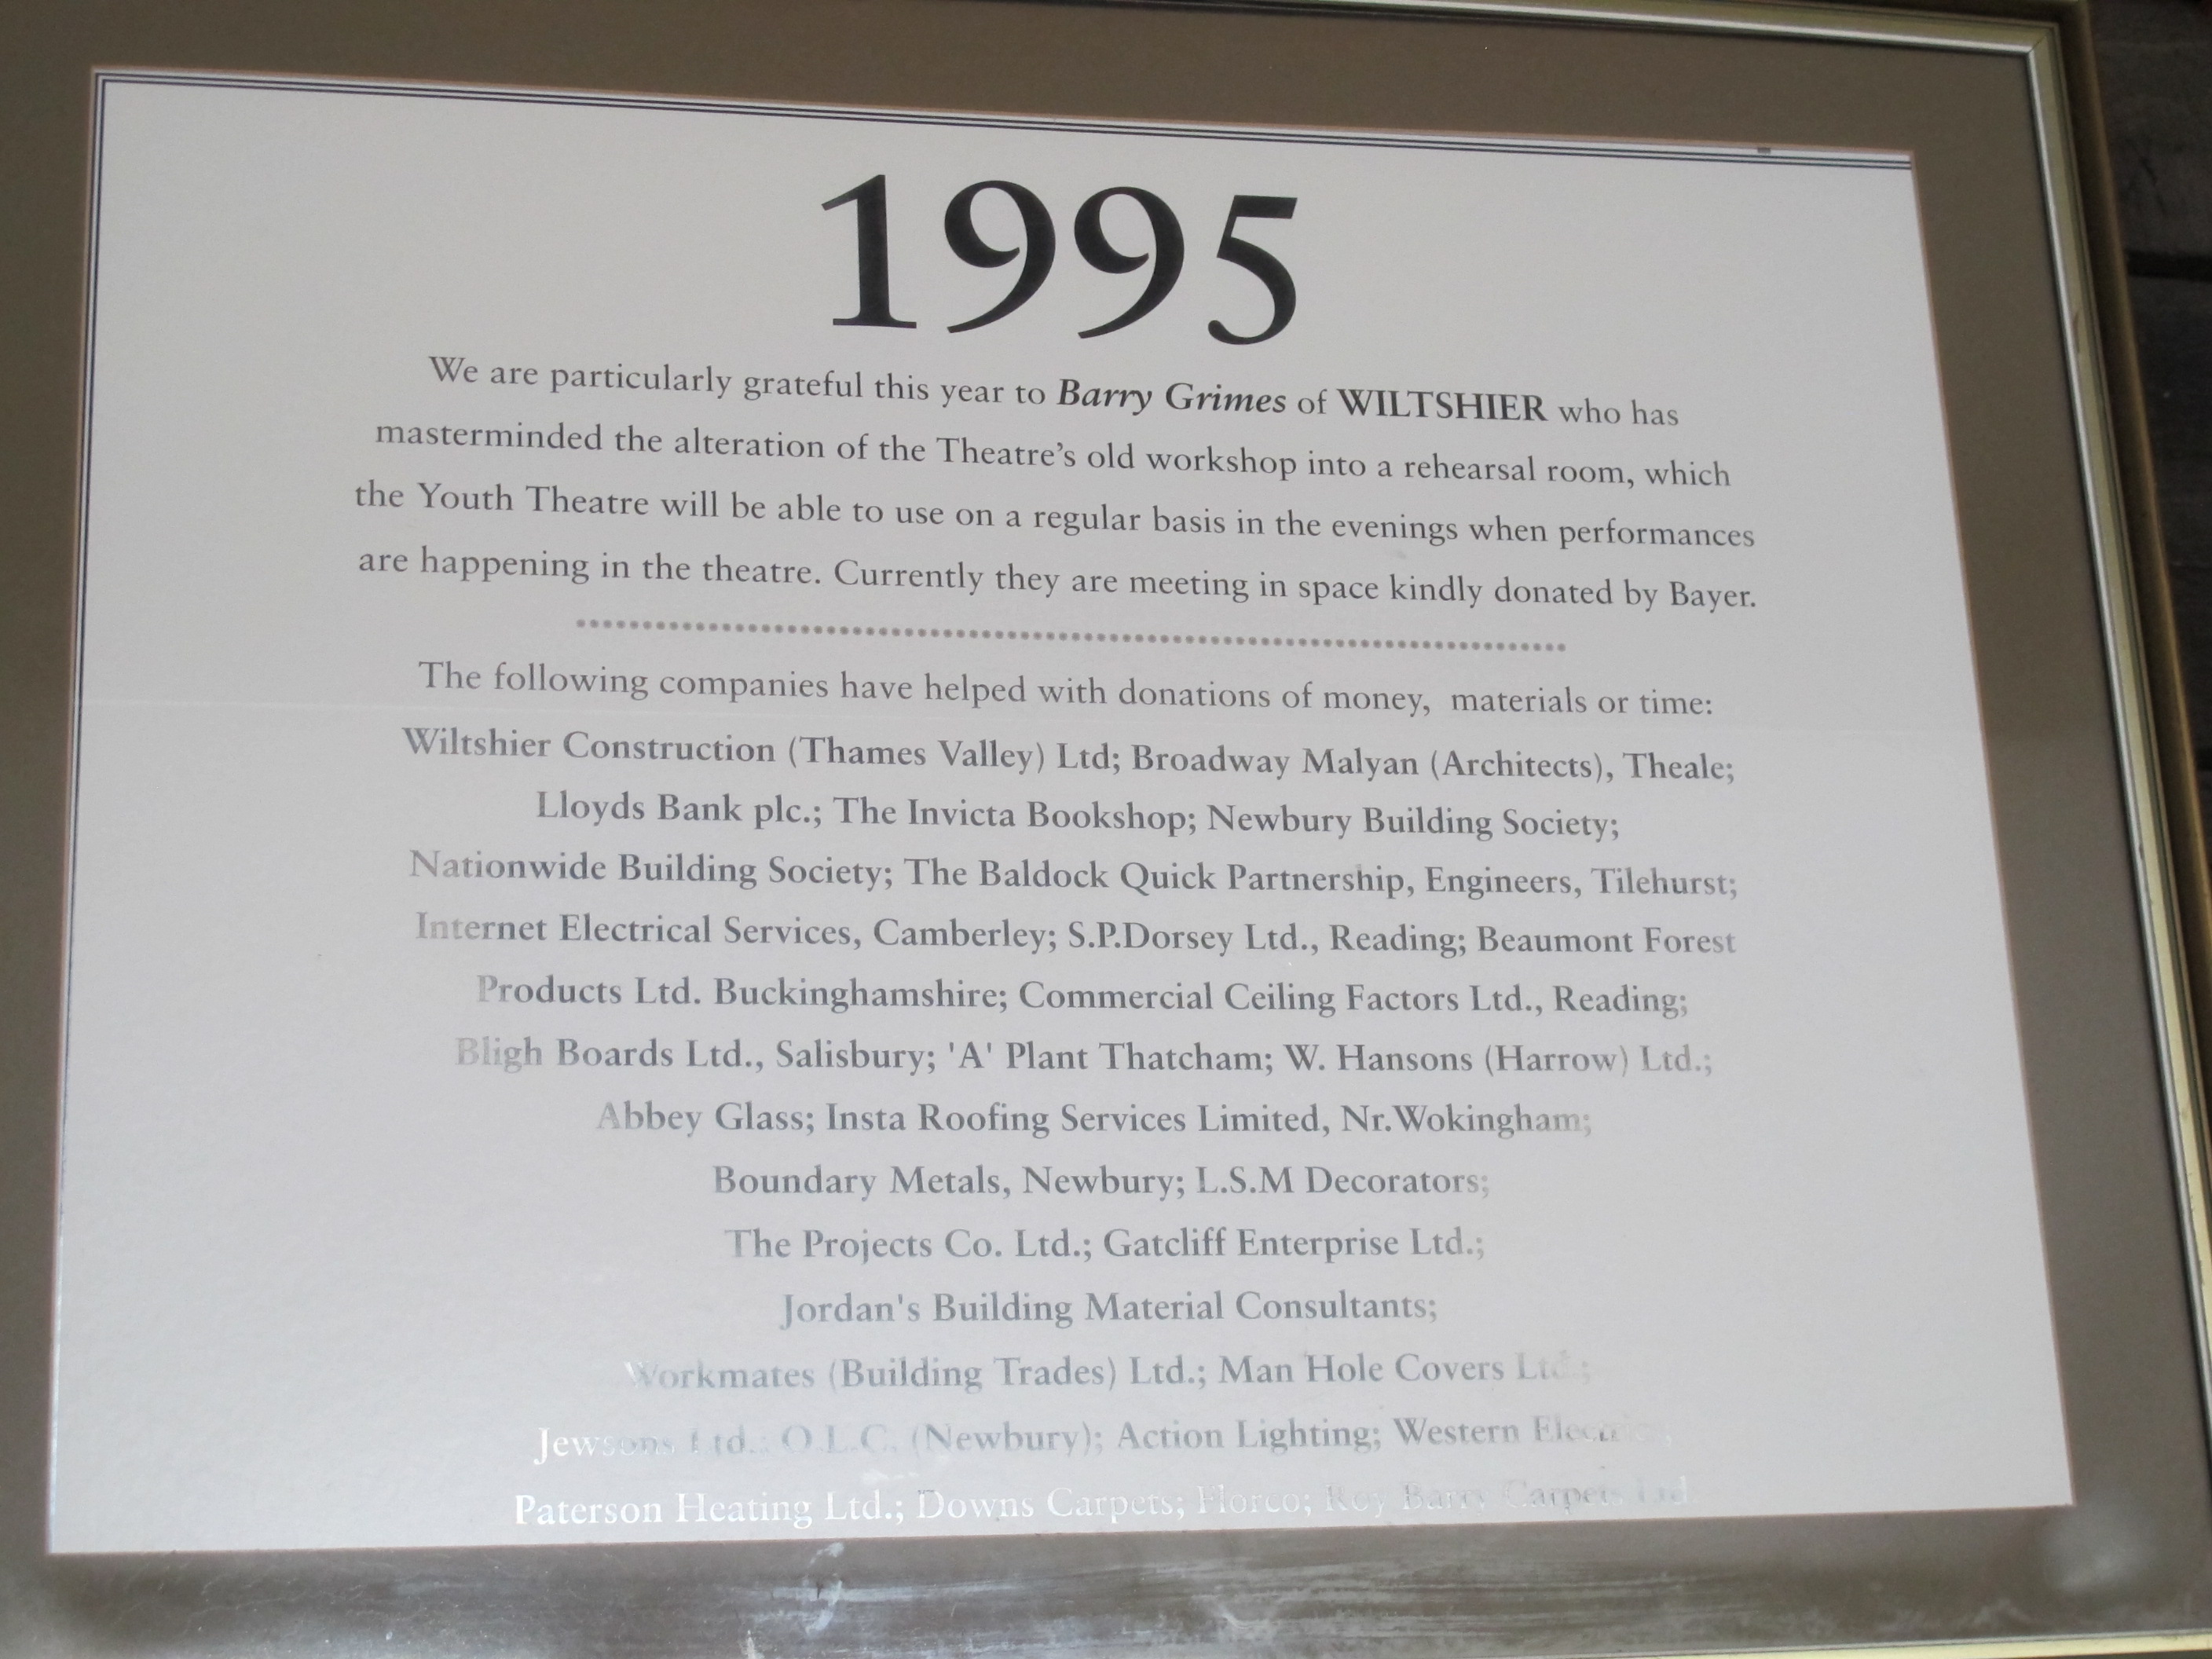 A photograph taken of the plaque commemorating the building of The Watermills rehearsal room